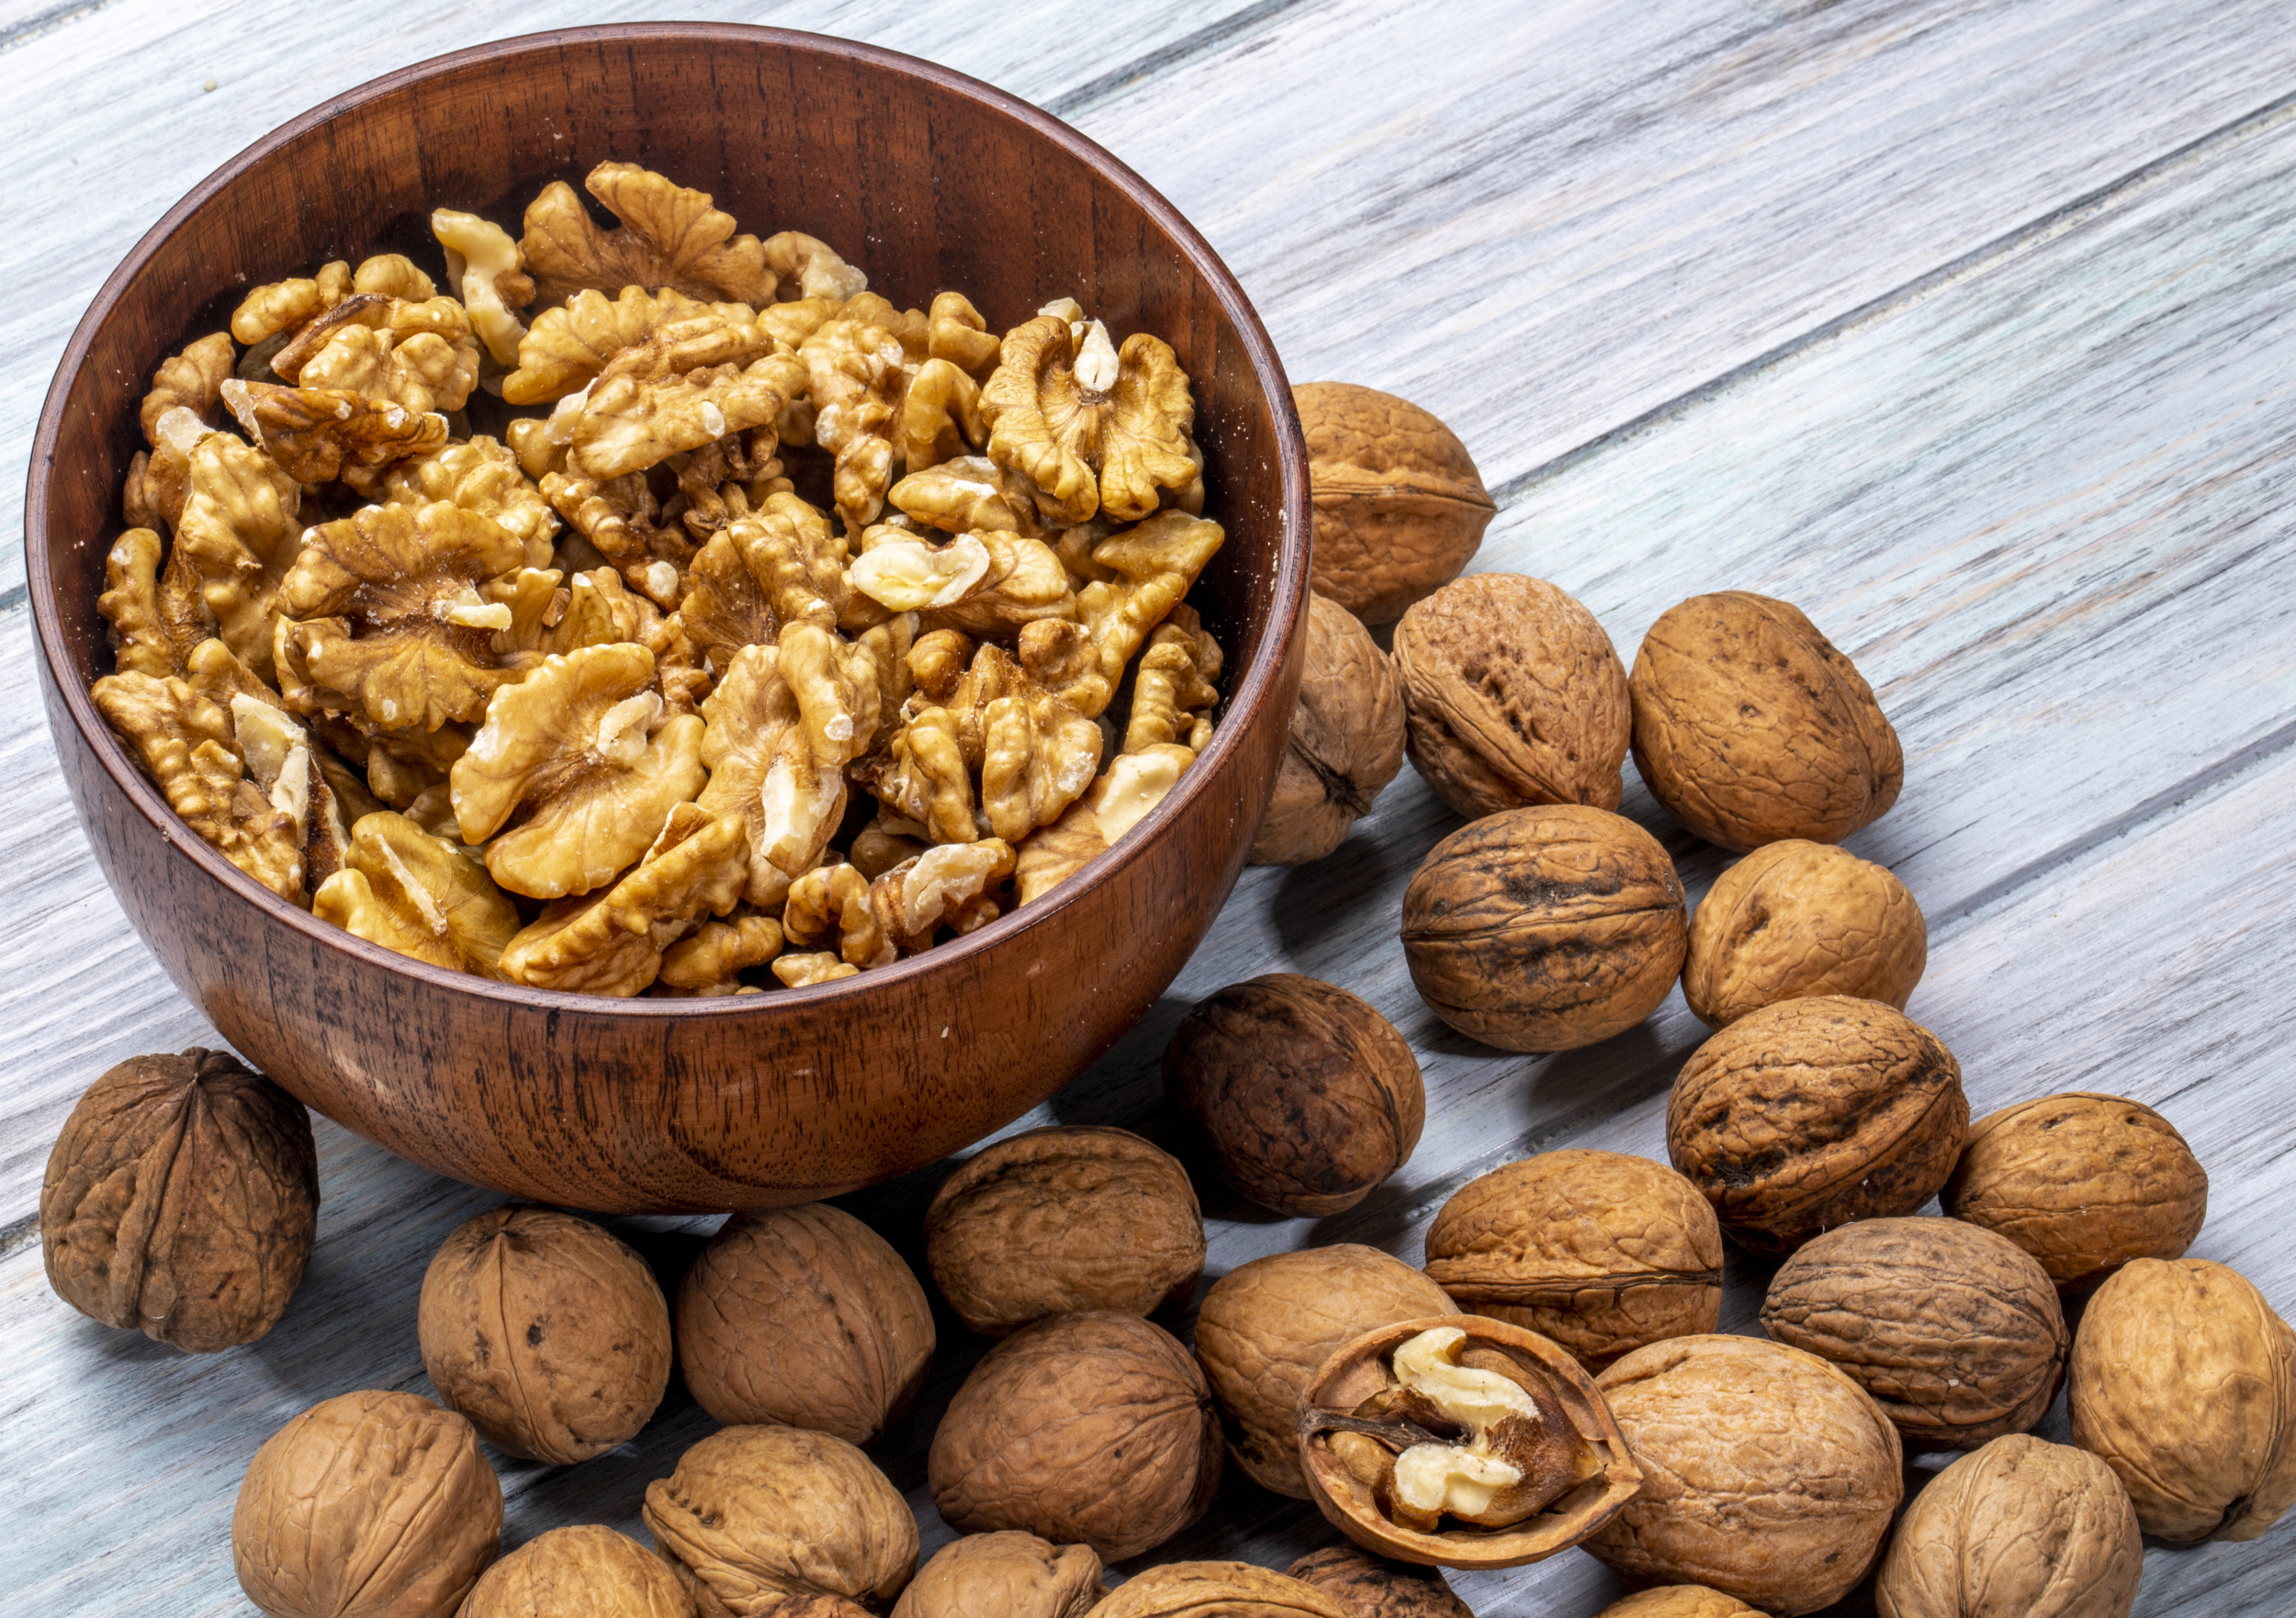 E-Coli Outbreak Linked To Natural Walnuts Sickens 12: CDC